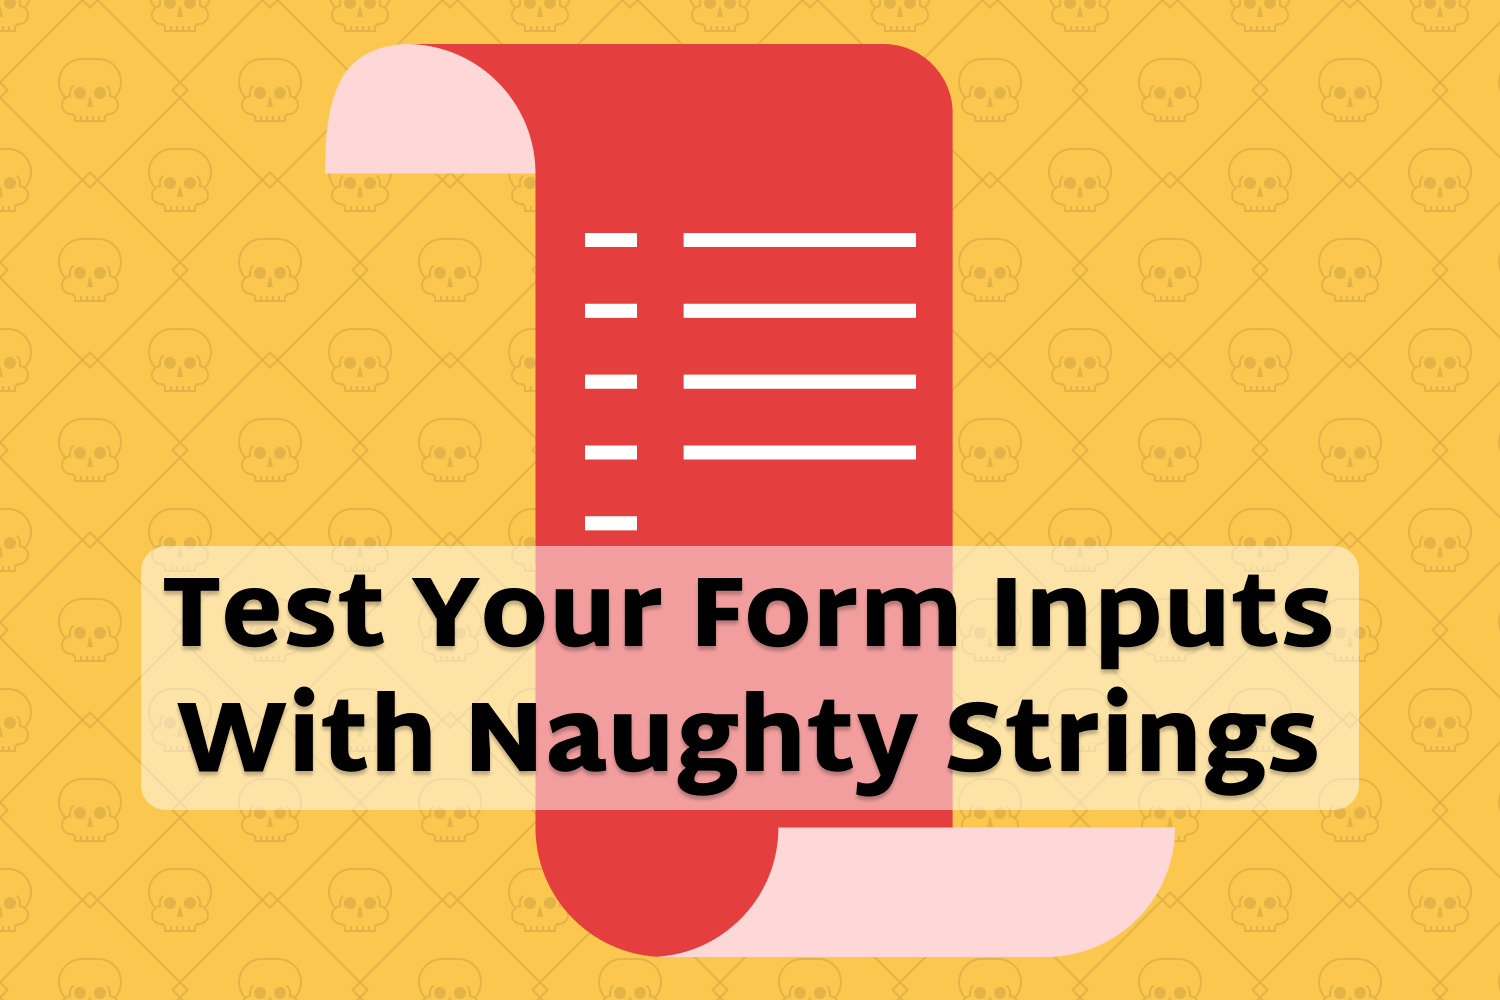 Test Your Form Inputs With Naughty Strings